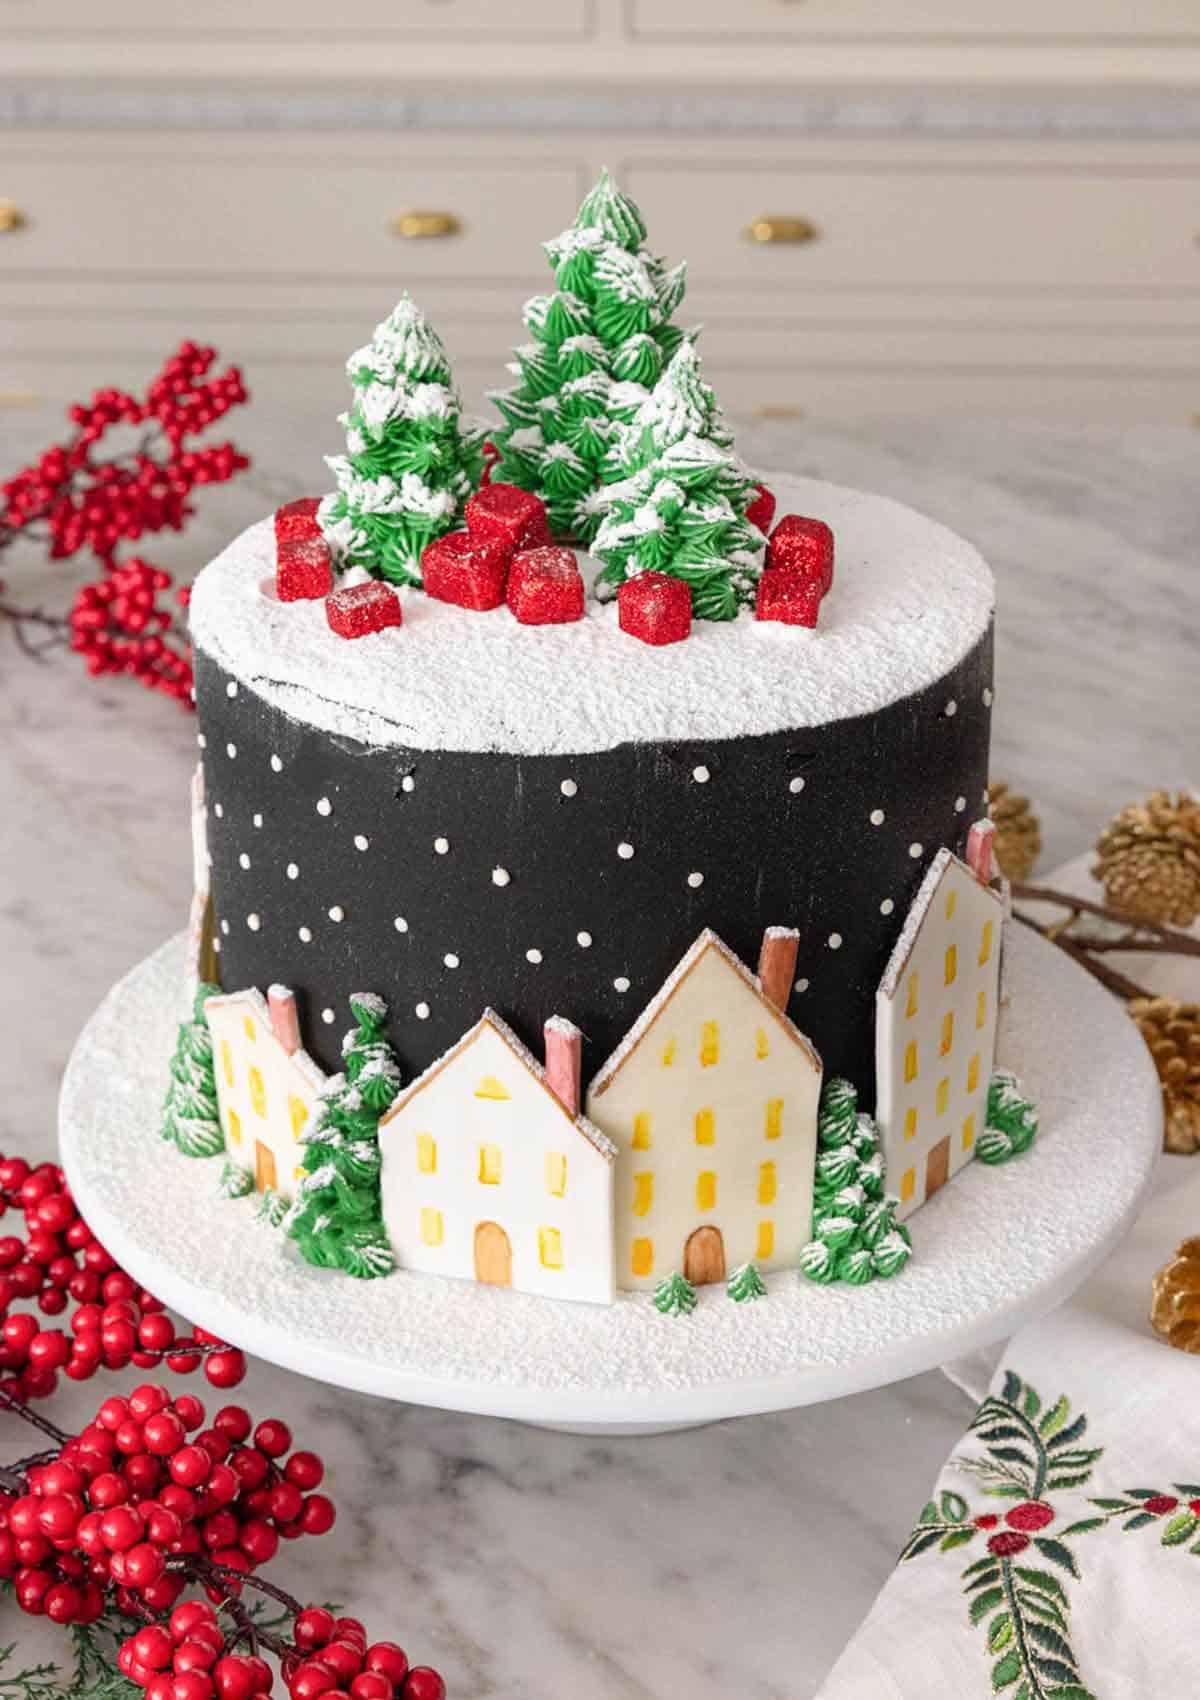 A cake decorated with houses, trees, and presents with a starry night frosting.